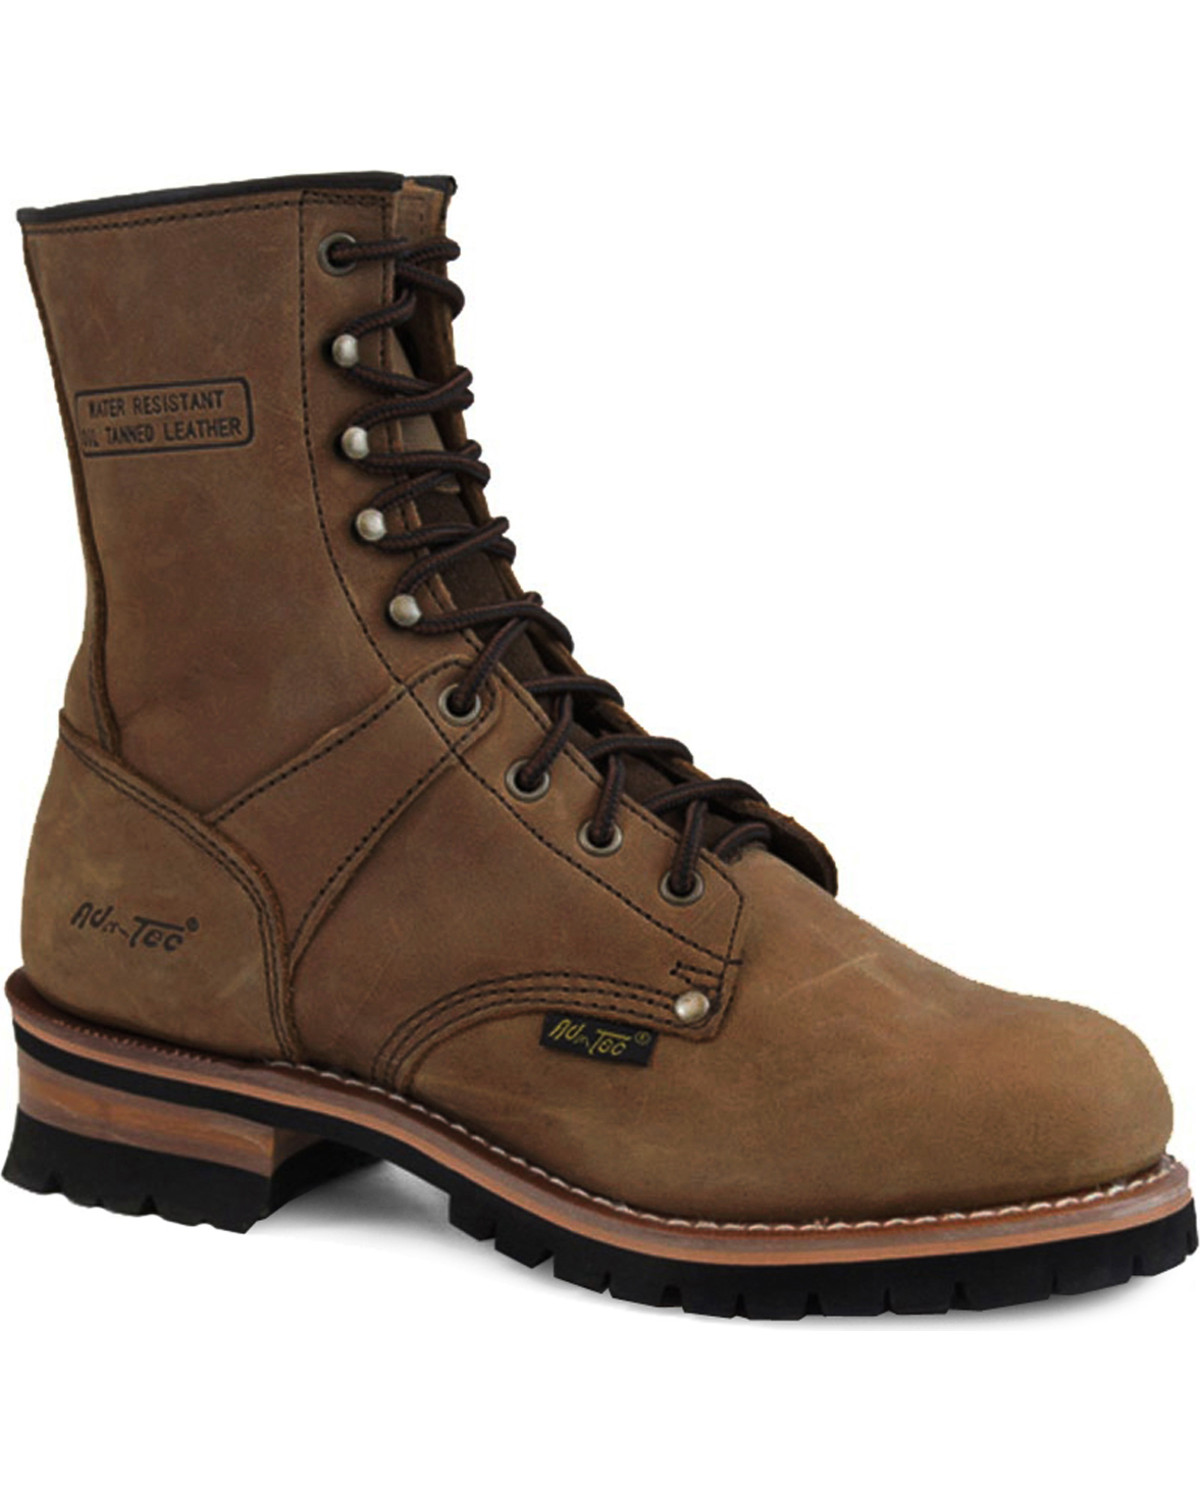 Ad Tec Womens 9 Logger Brown-W Boot 